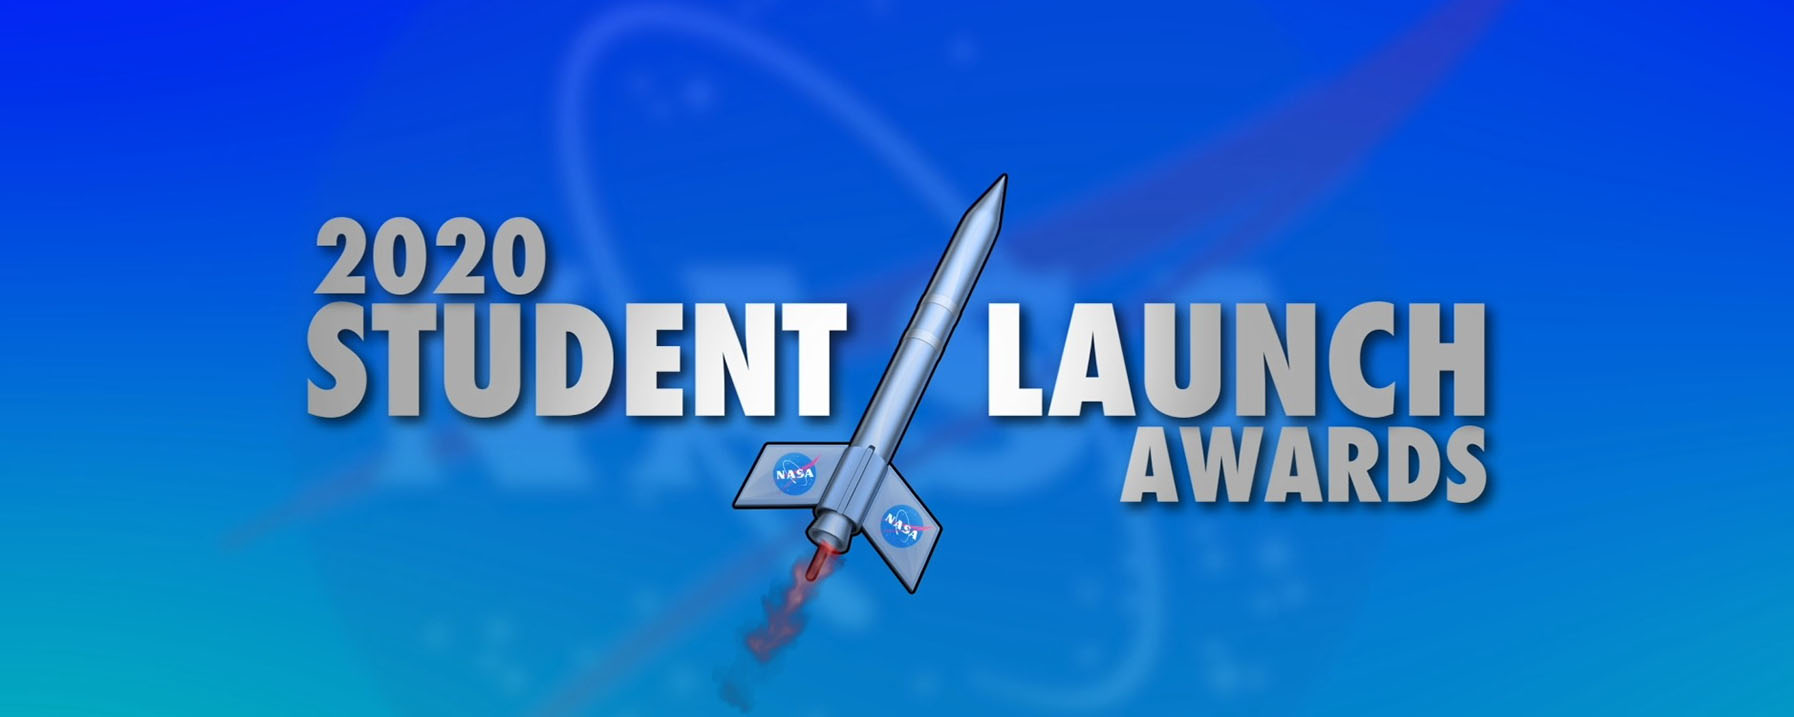 2020 Student Launch Awards